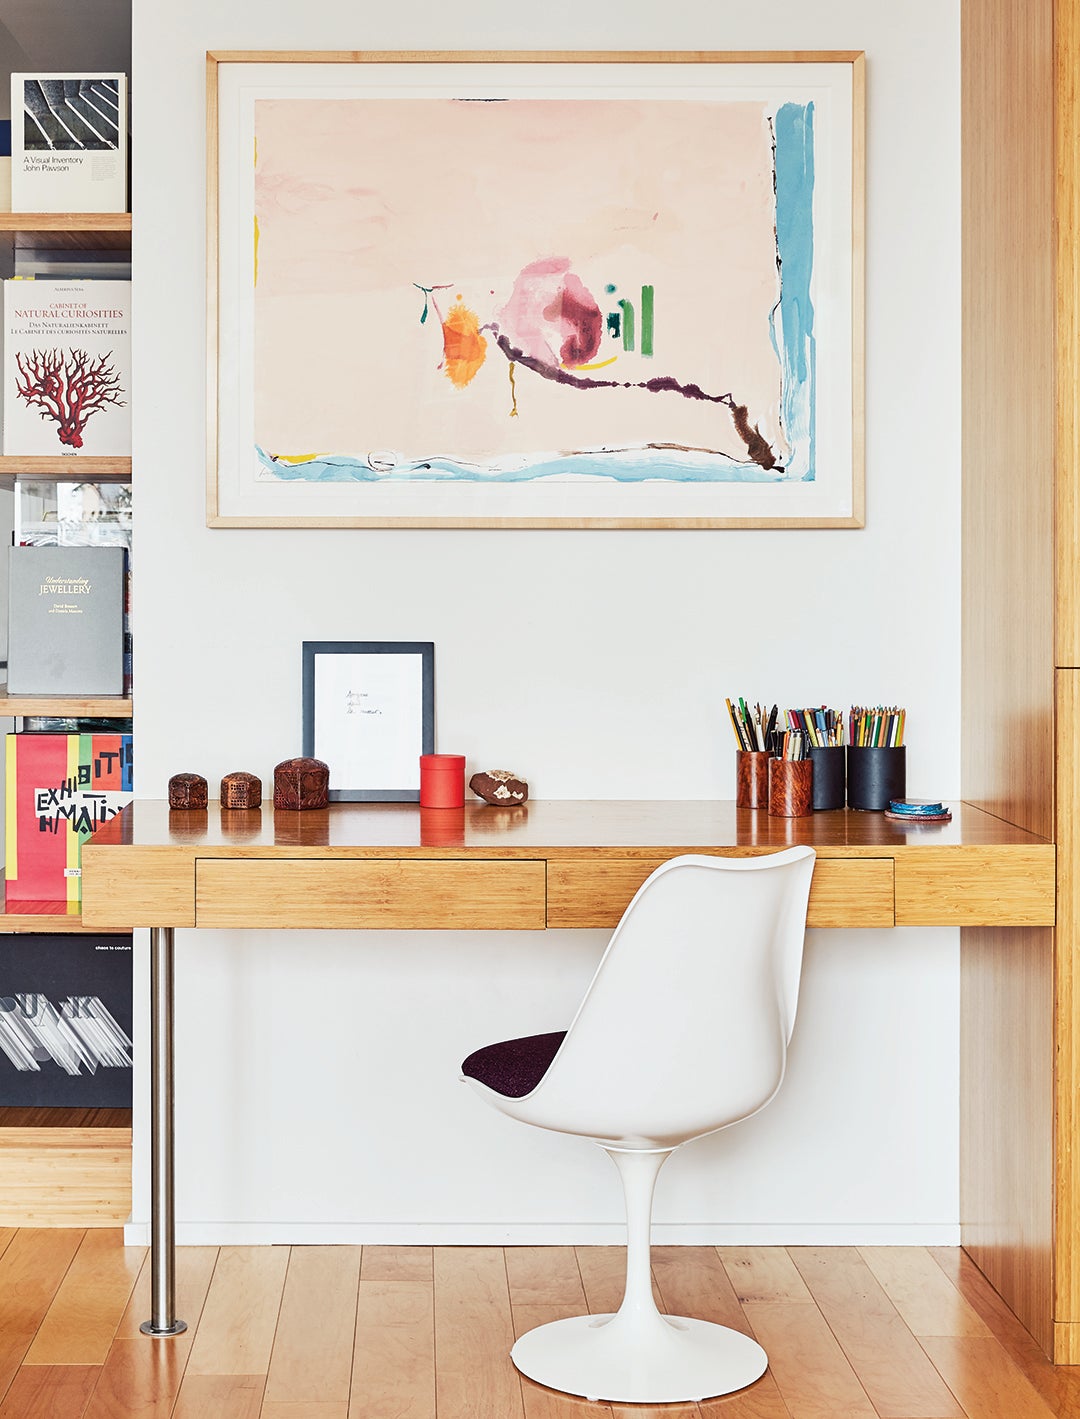 Mellem service Sober This Quiz By Herman Miller Will Help You Sort Your Home Office Design